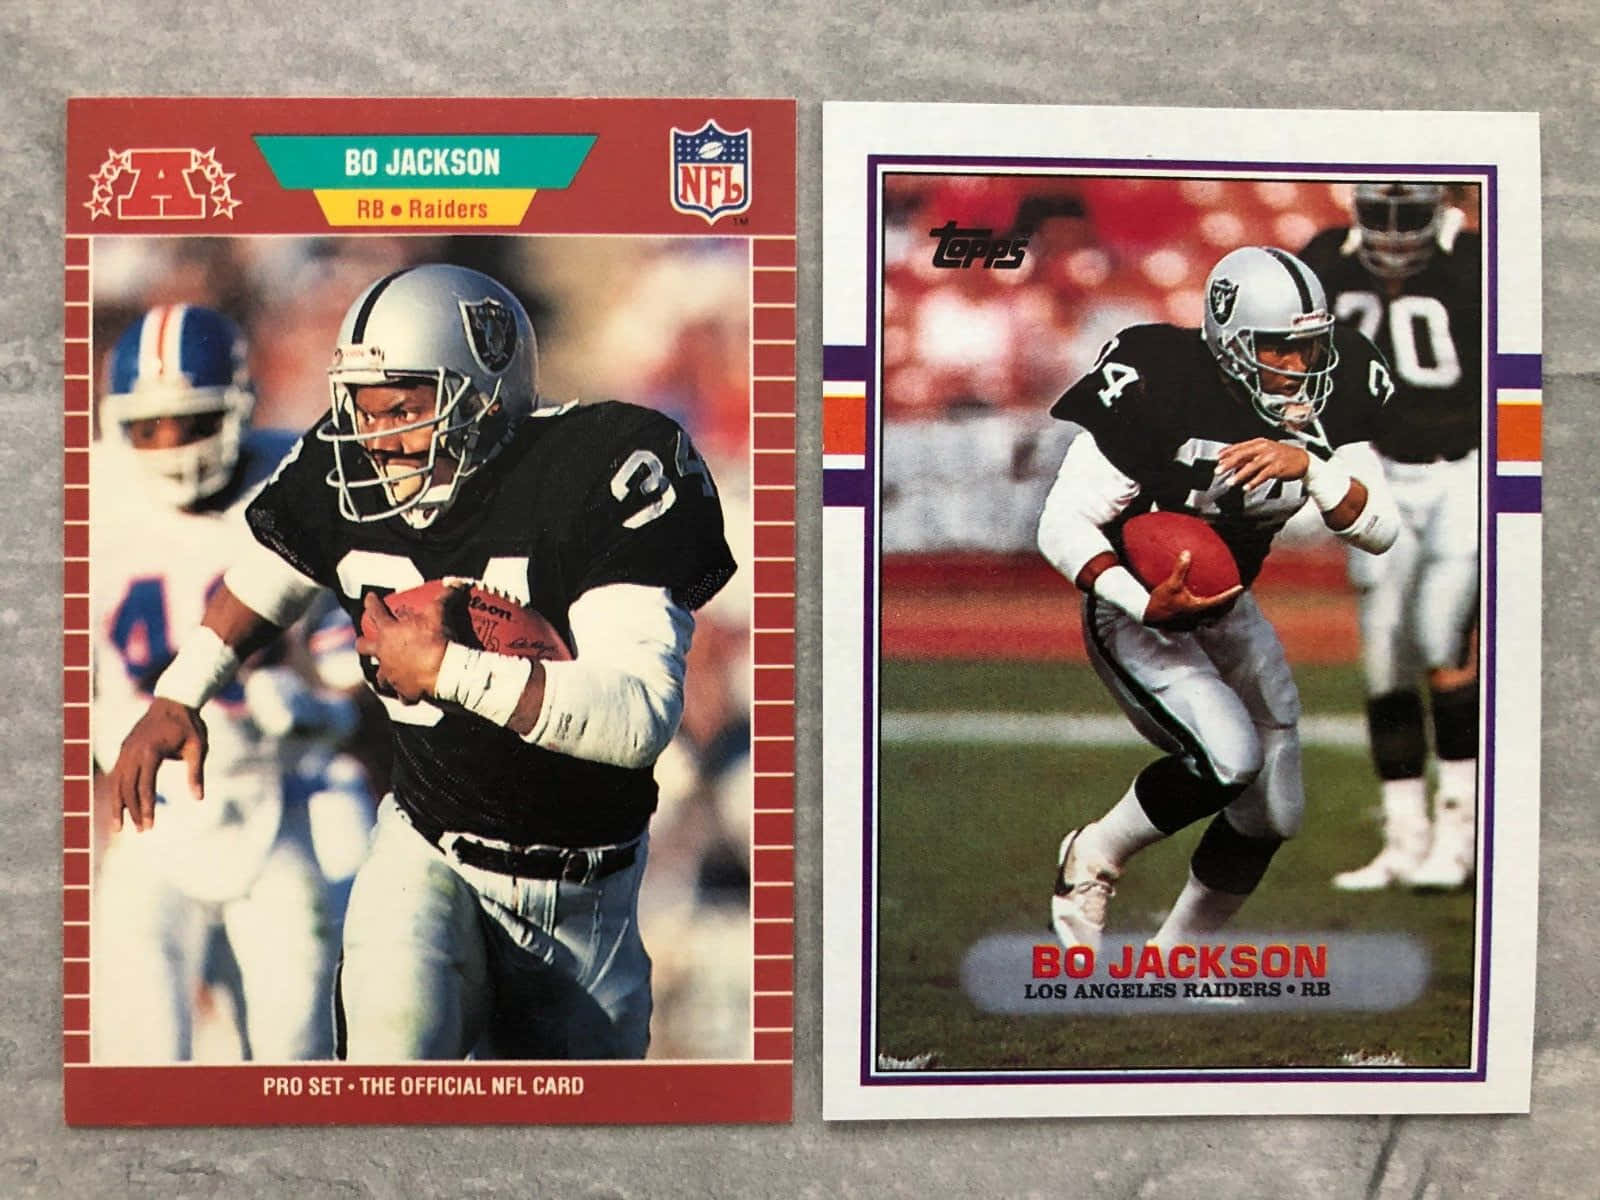 Bo Jackson Collector Edition Cards Background